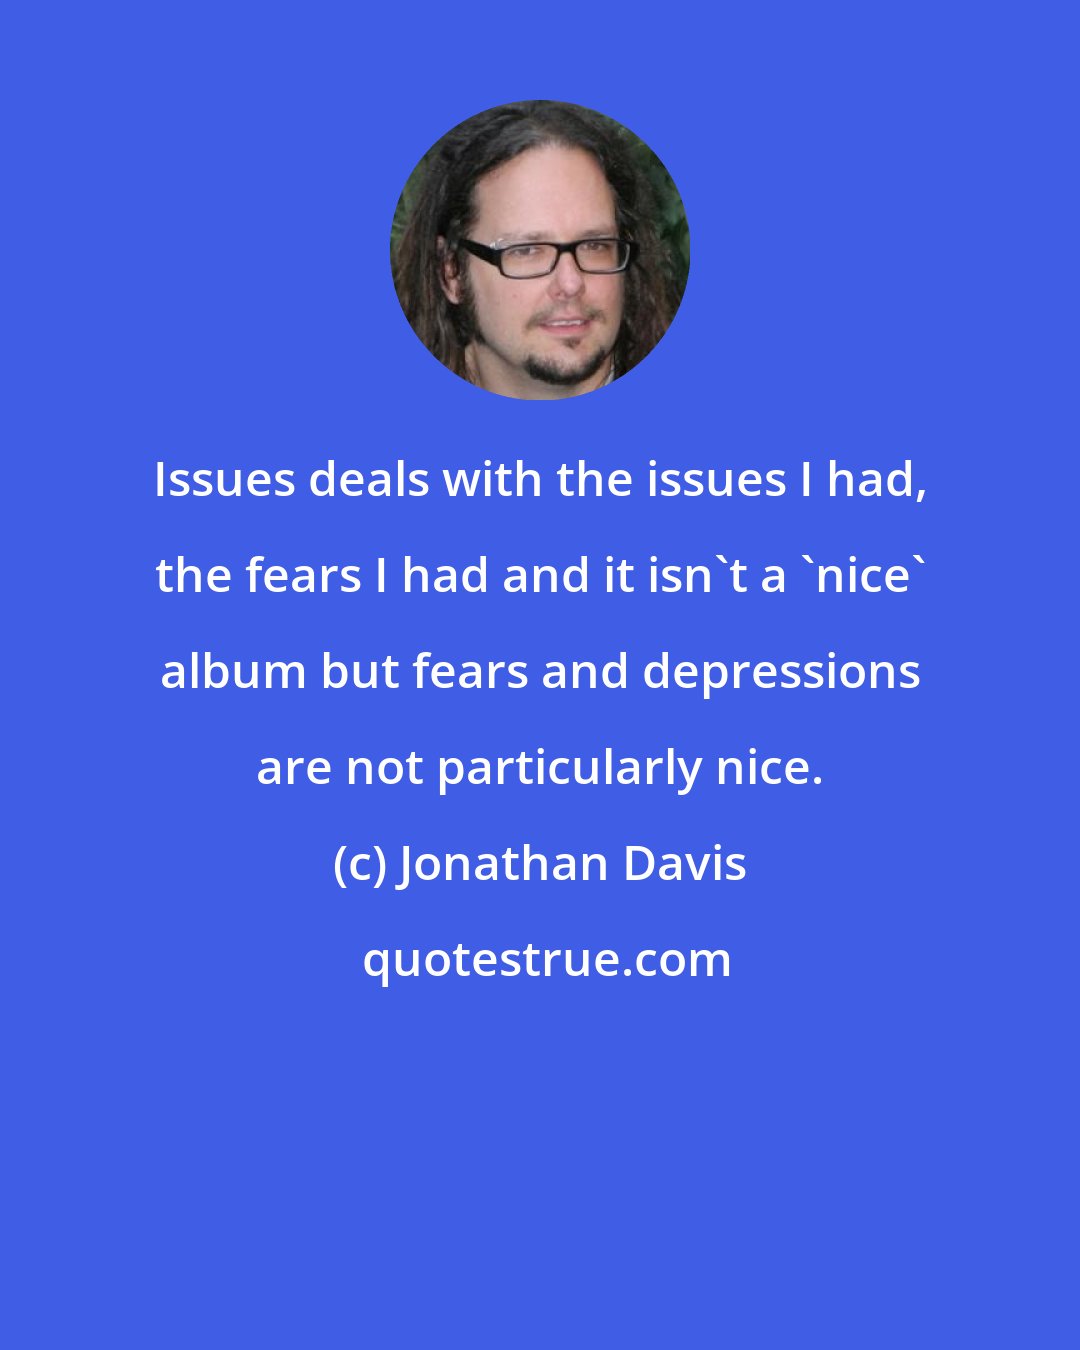 Jonathan Davis: Issues deals with the issues I had, the fears I had and it isn't a 'nice' album but fears and depressions are not particularly nice.